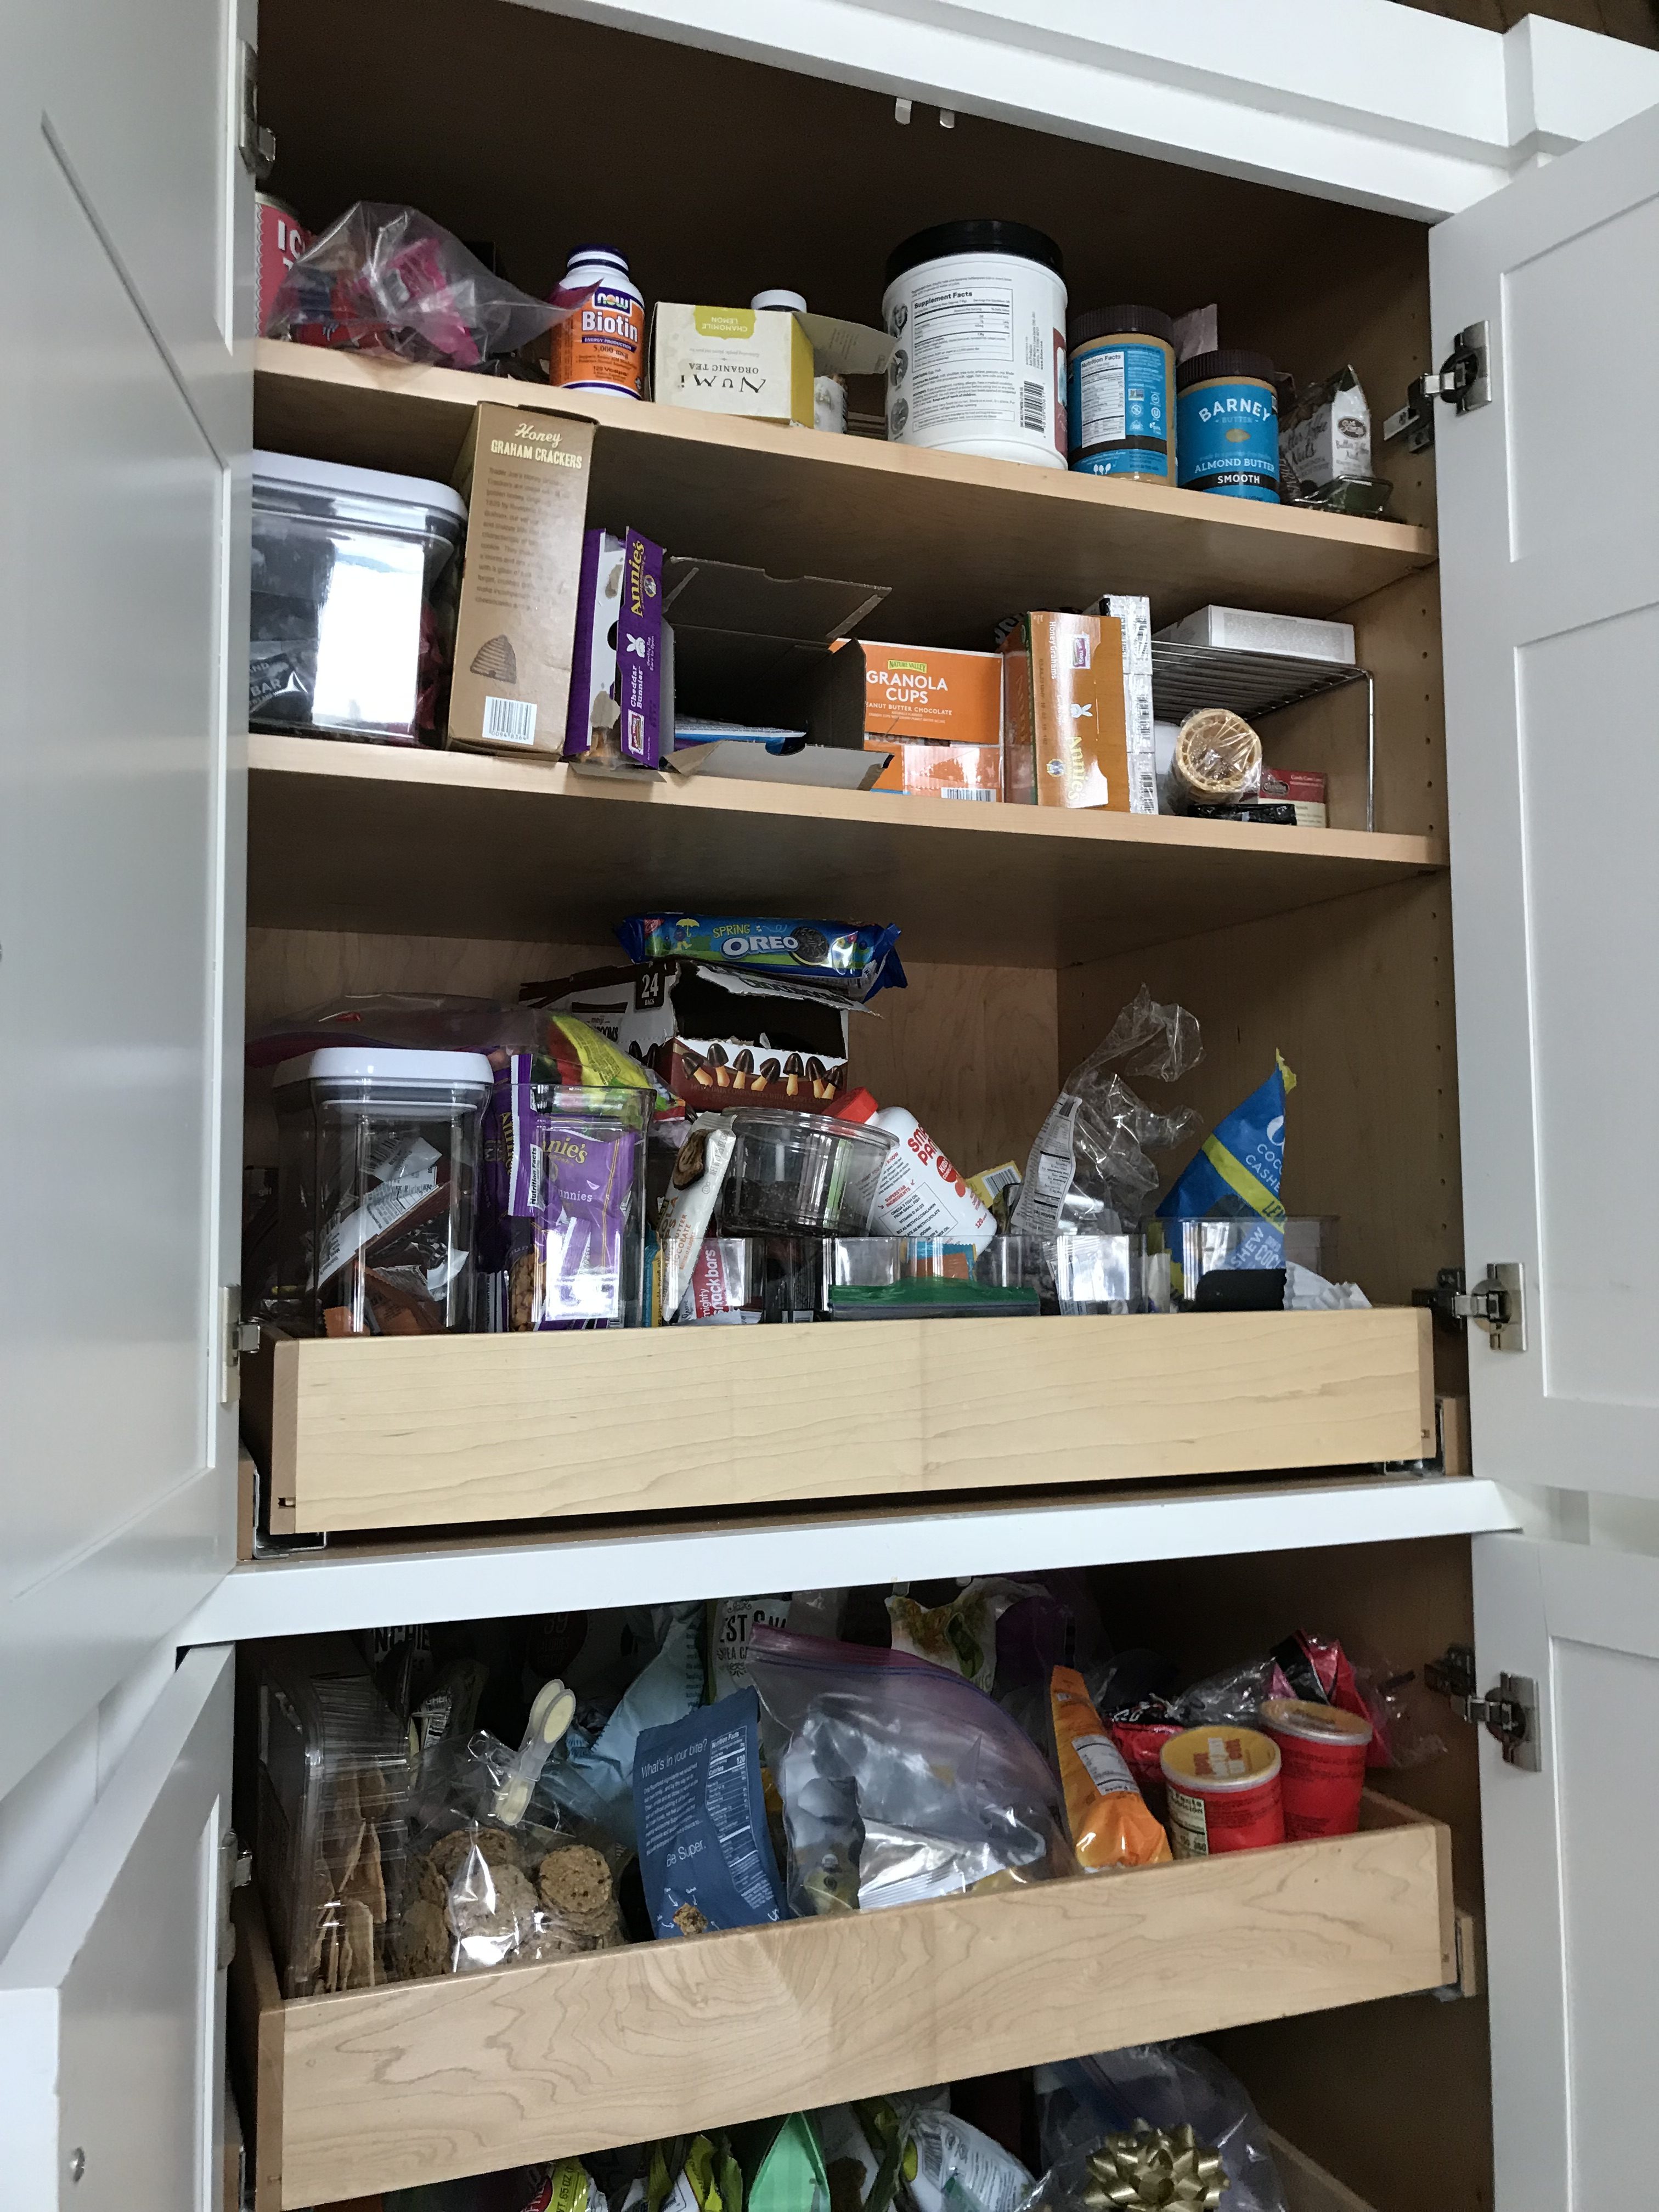 https://simplyorganized.me/wp-content/uploads/2018/08/Pantry-Pull-Outs-e1534475128109.jpg